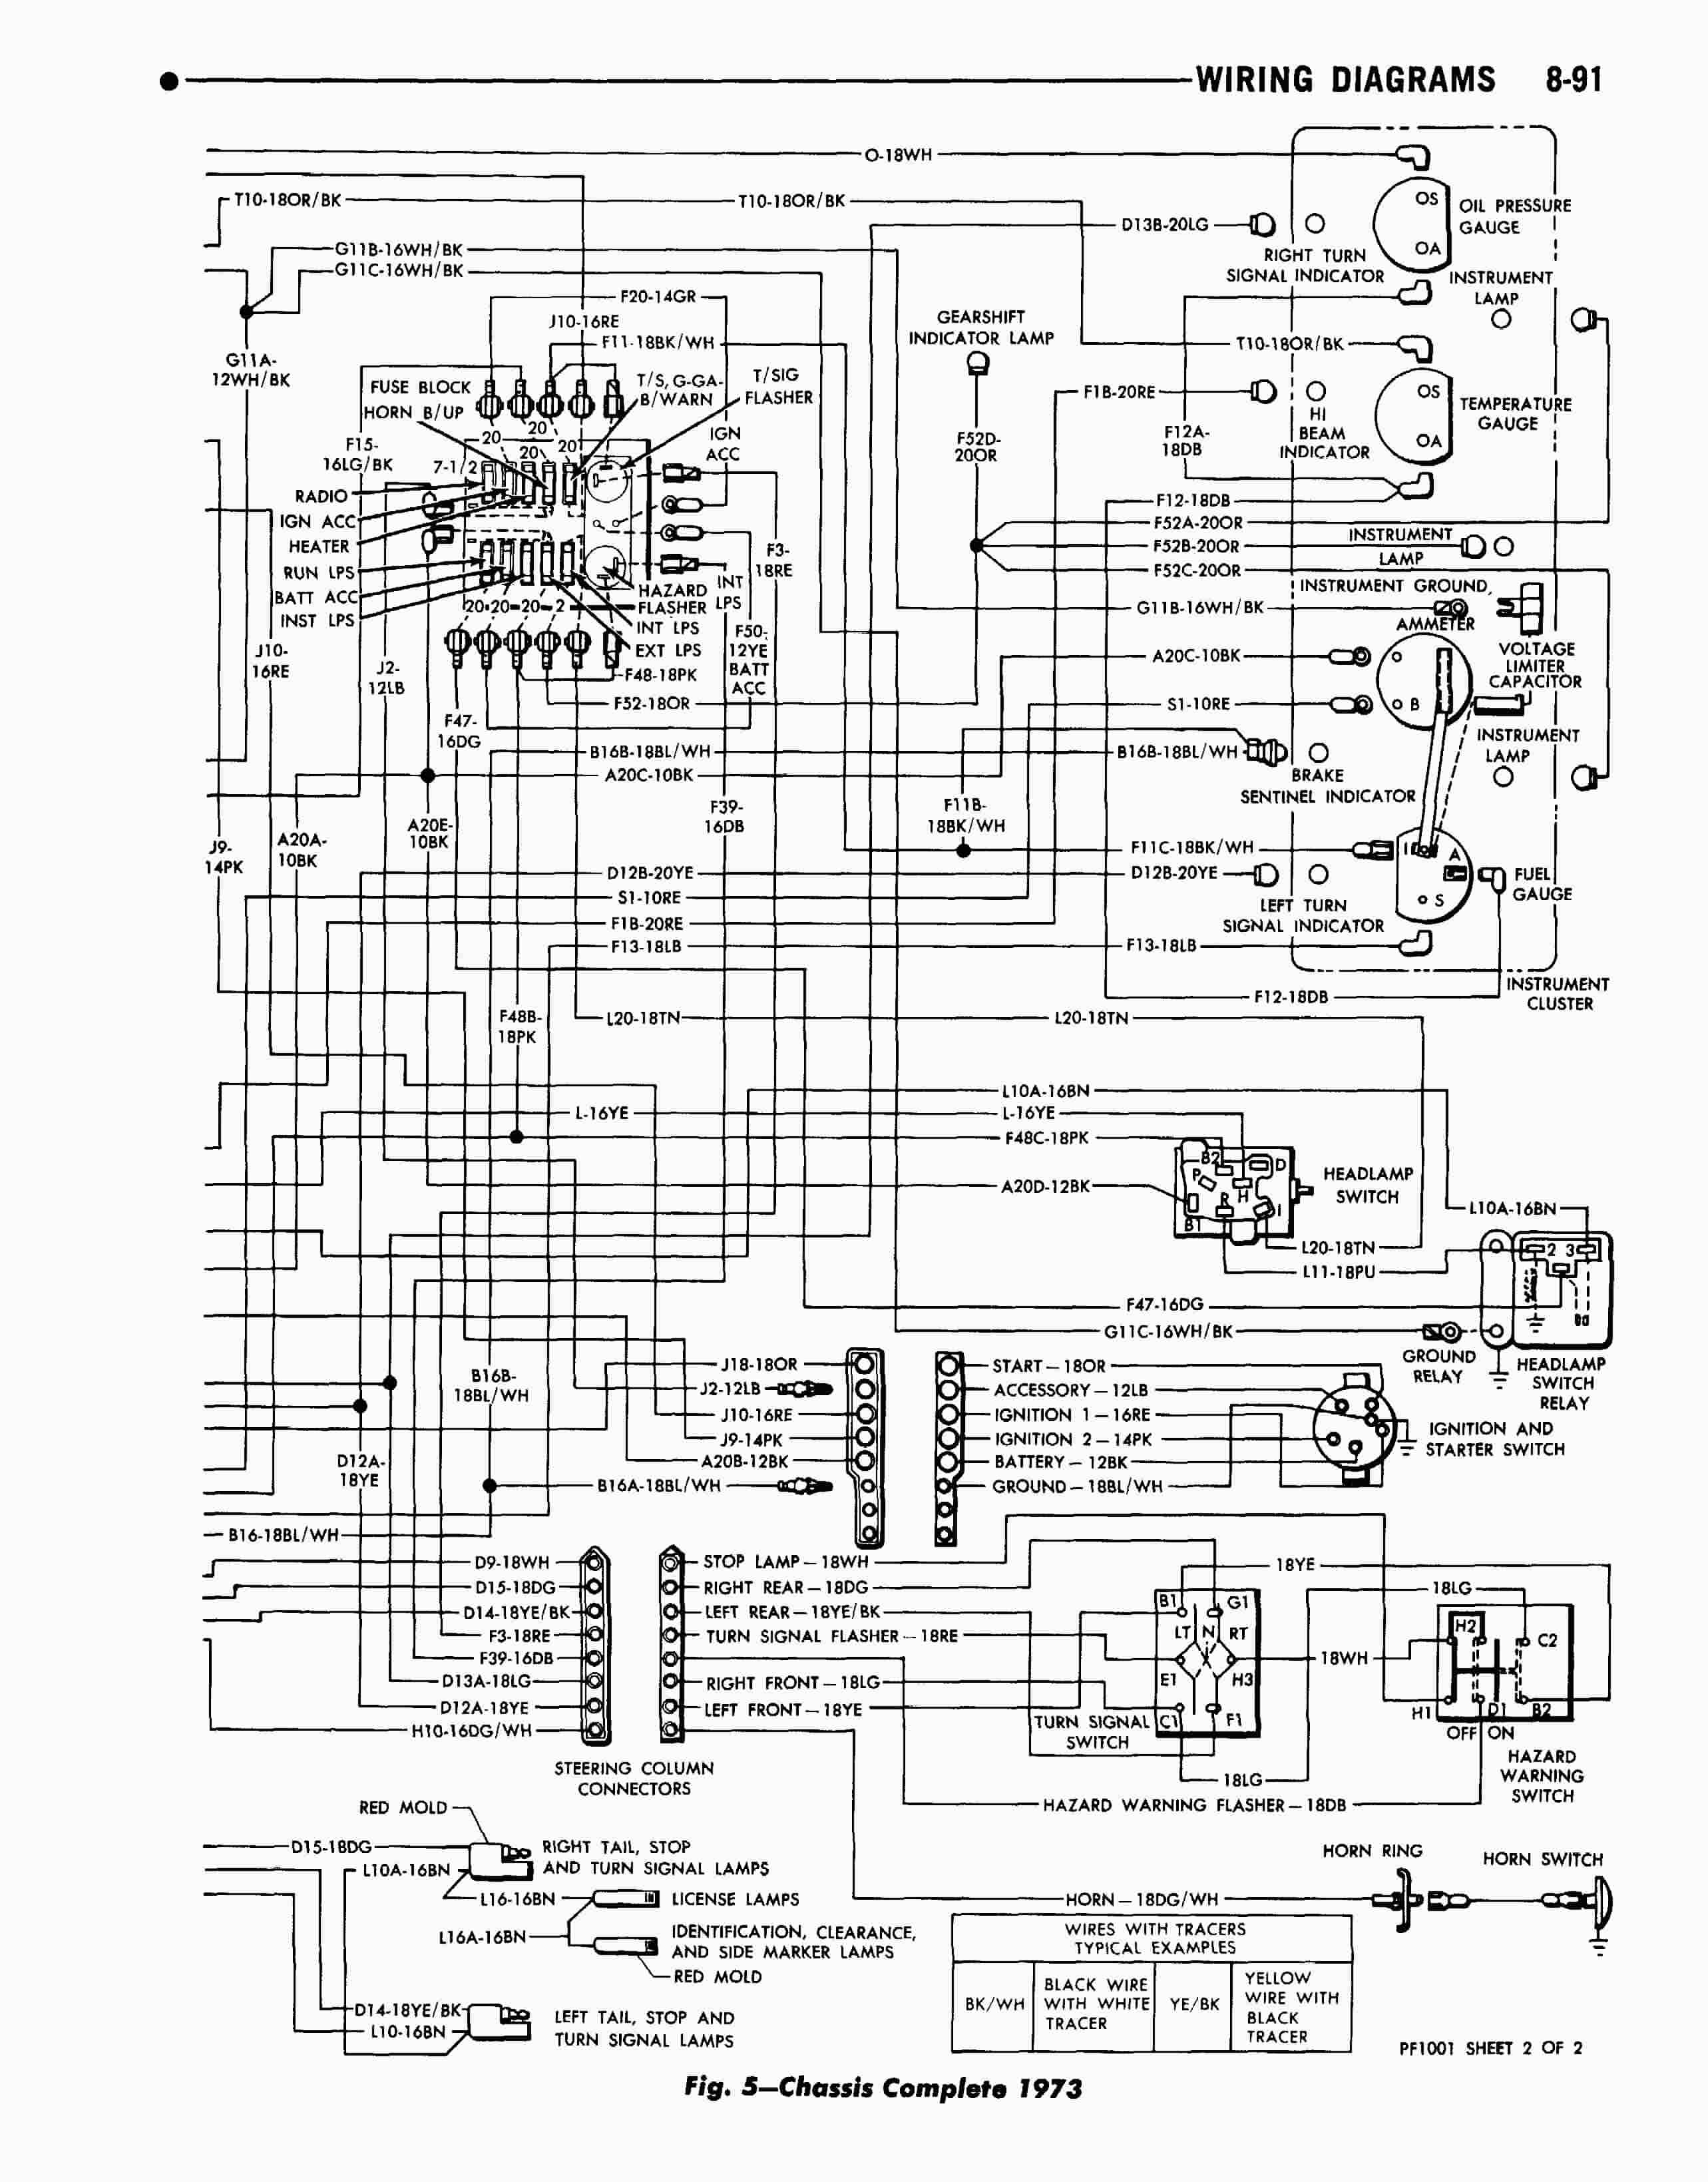 Dave's Place - 73 Dodge Class A Chassis Wiring Diagram  78 Dodge Delta Motorhome Wiring Diagram    Daves Place